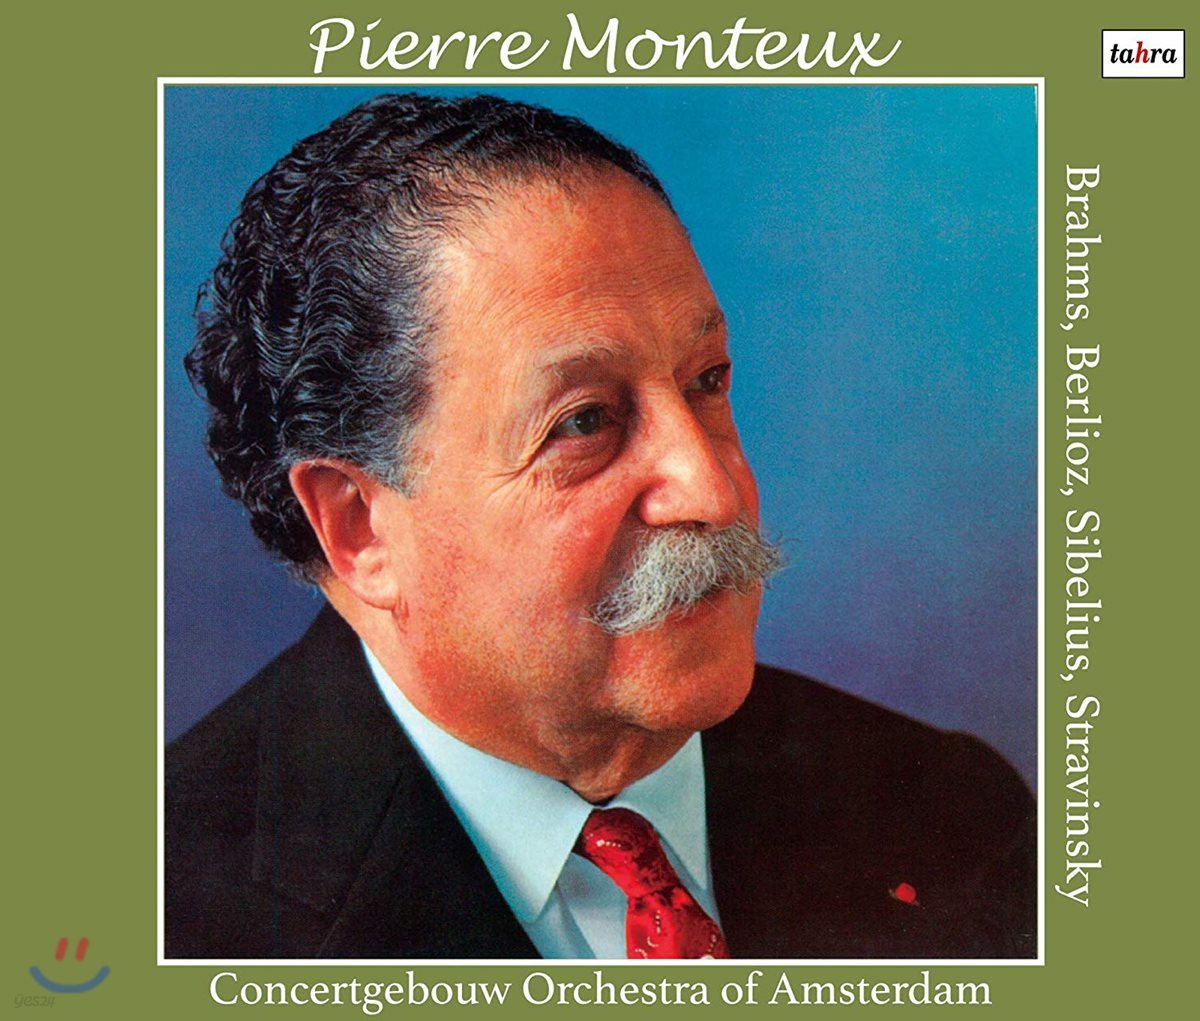 Pierre Monteux 피에르 몽퇴 & 콘서트헤보우의 예술 (Pierre Monteux and Concertgebouw Orchestra of Amsterdam) [4CD]